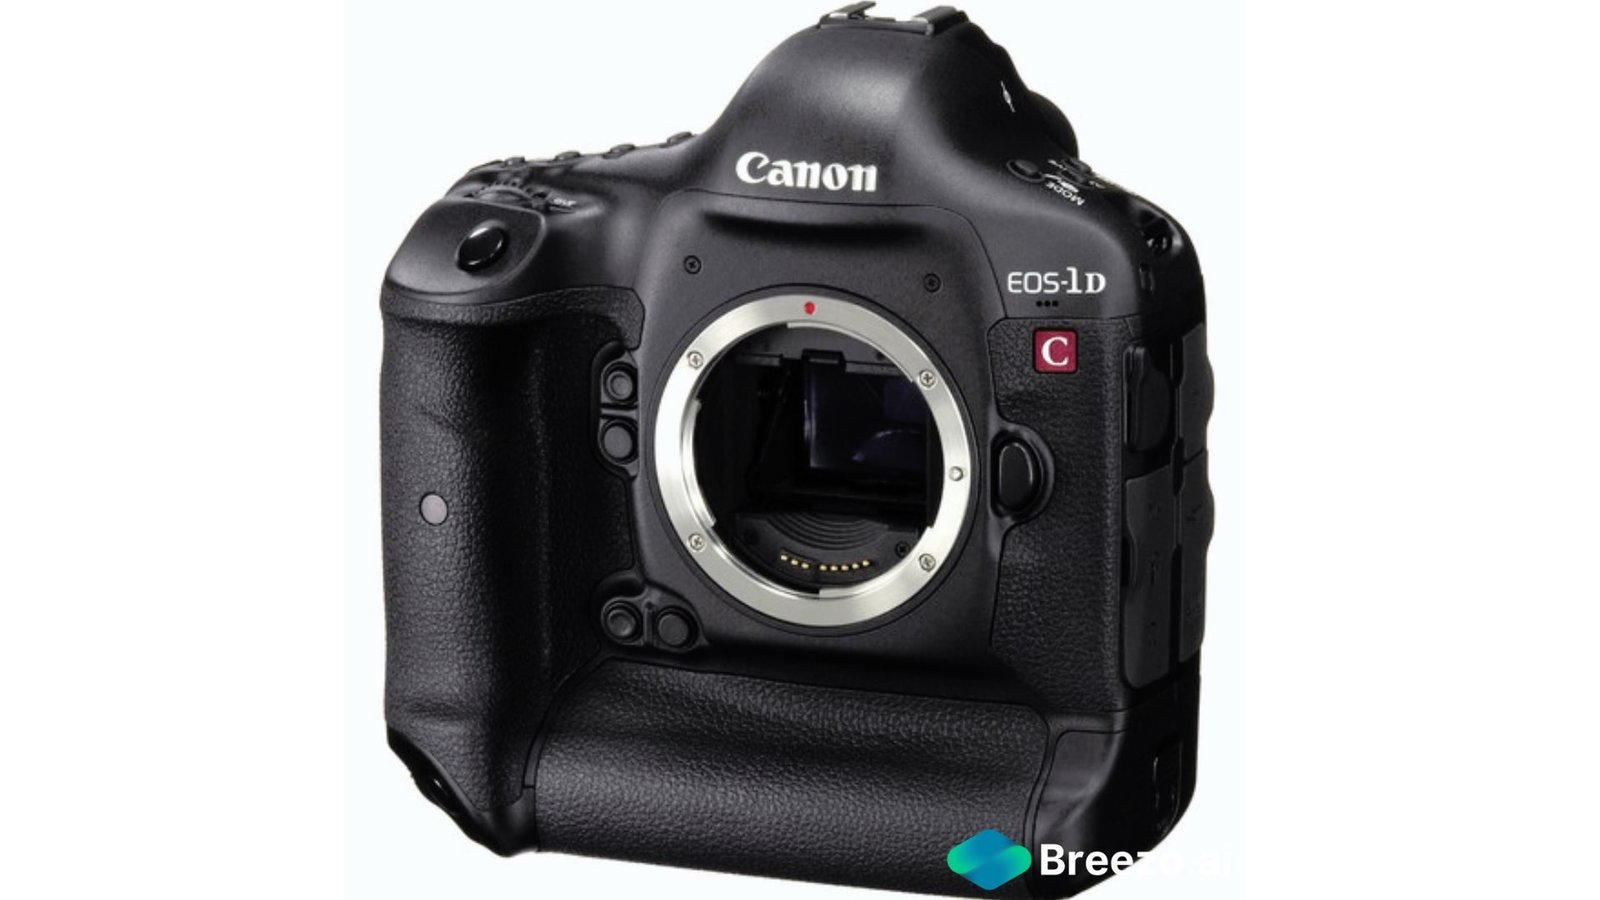 Rent Canon 1-DC Camera Body in Delhi NCR, Rent Canon EOS R-5 Mirror Less 8K Camera with Cp.2 Lens Kit in Delhi NCR, Camera accessories, Camera lenses for rent, in Delhi Gurgaon Noida, hire Shooting equipment, Lighting equipment rental, Film gear rental for Video production, camera rental company in Delhi, film equipment rental company